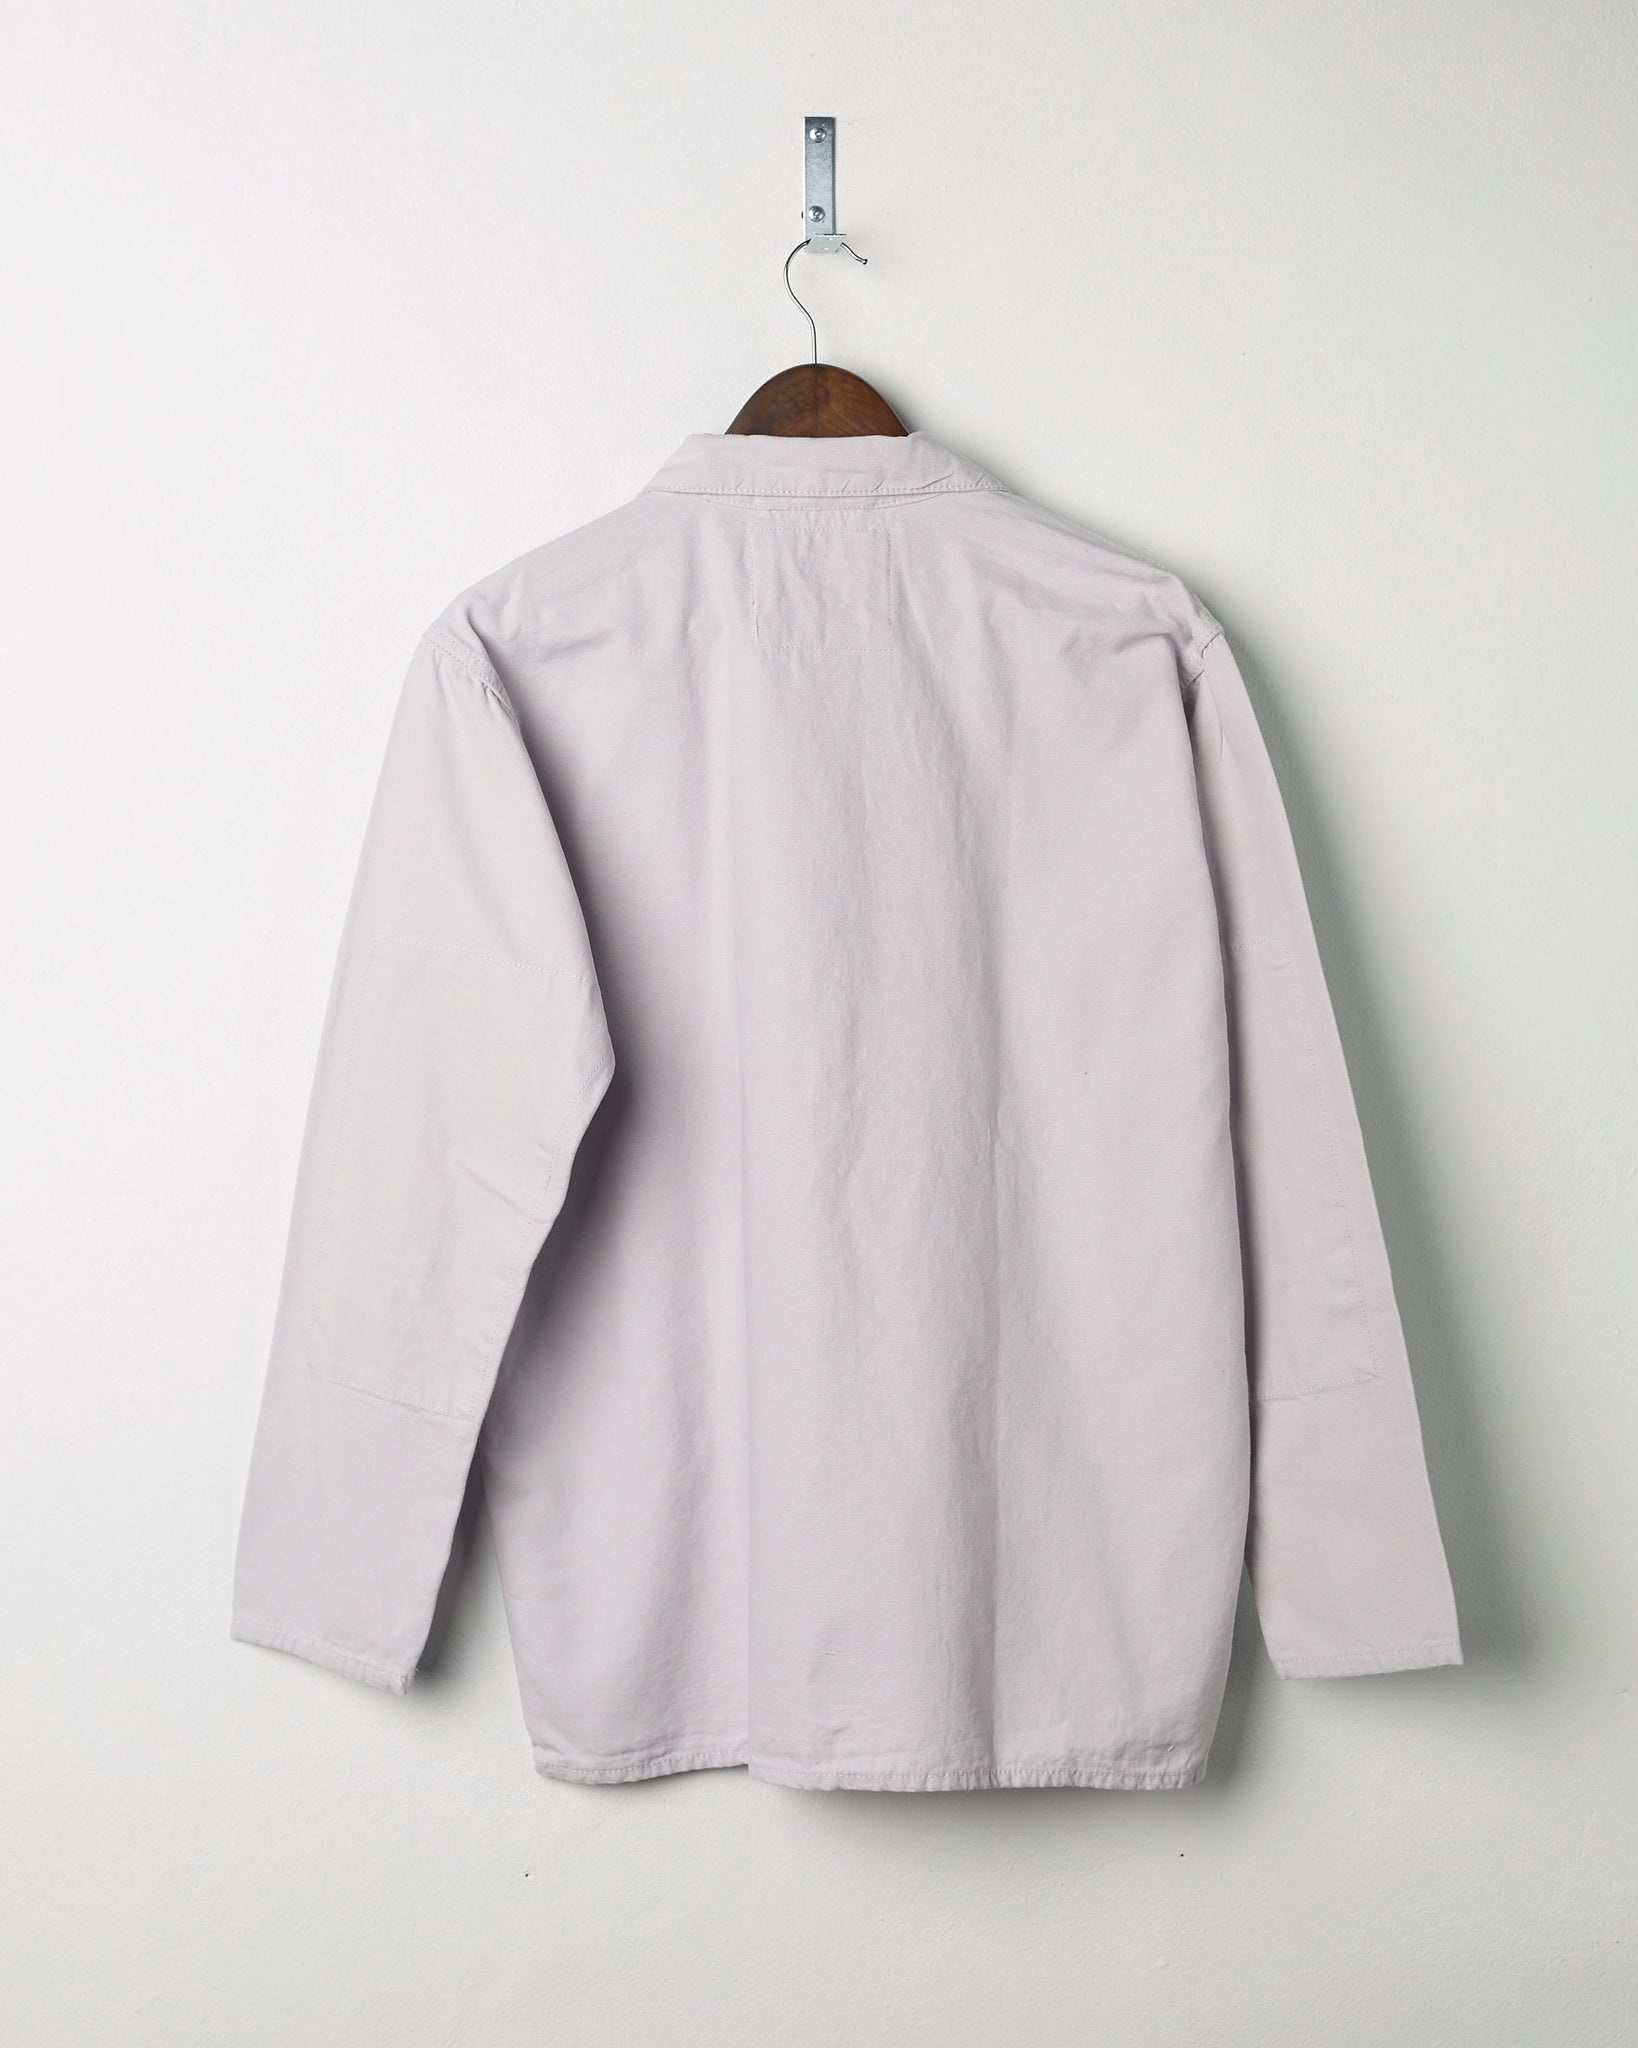 Back view of the #3002 light-grey zip jacket displayed on a hanger, showing reinforced elbows and simple silhouette.